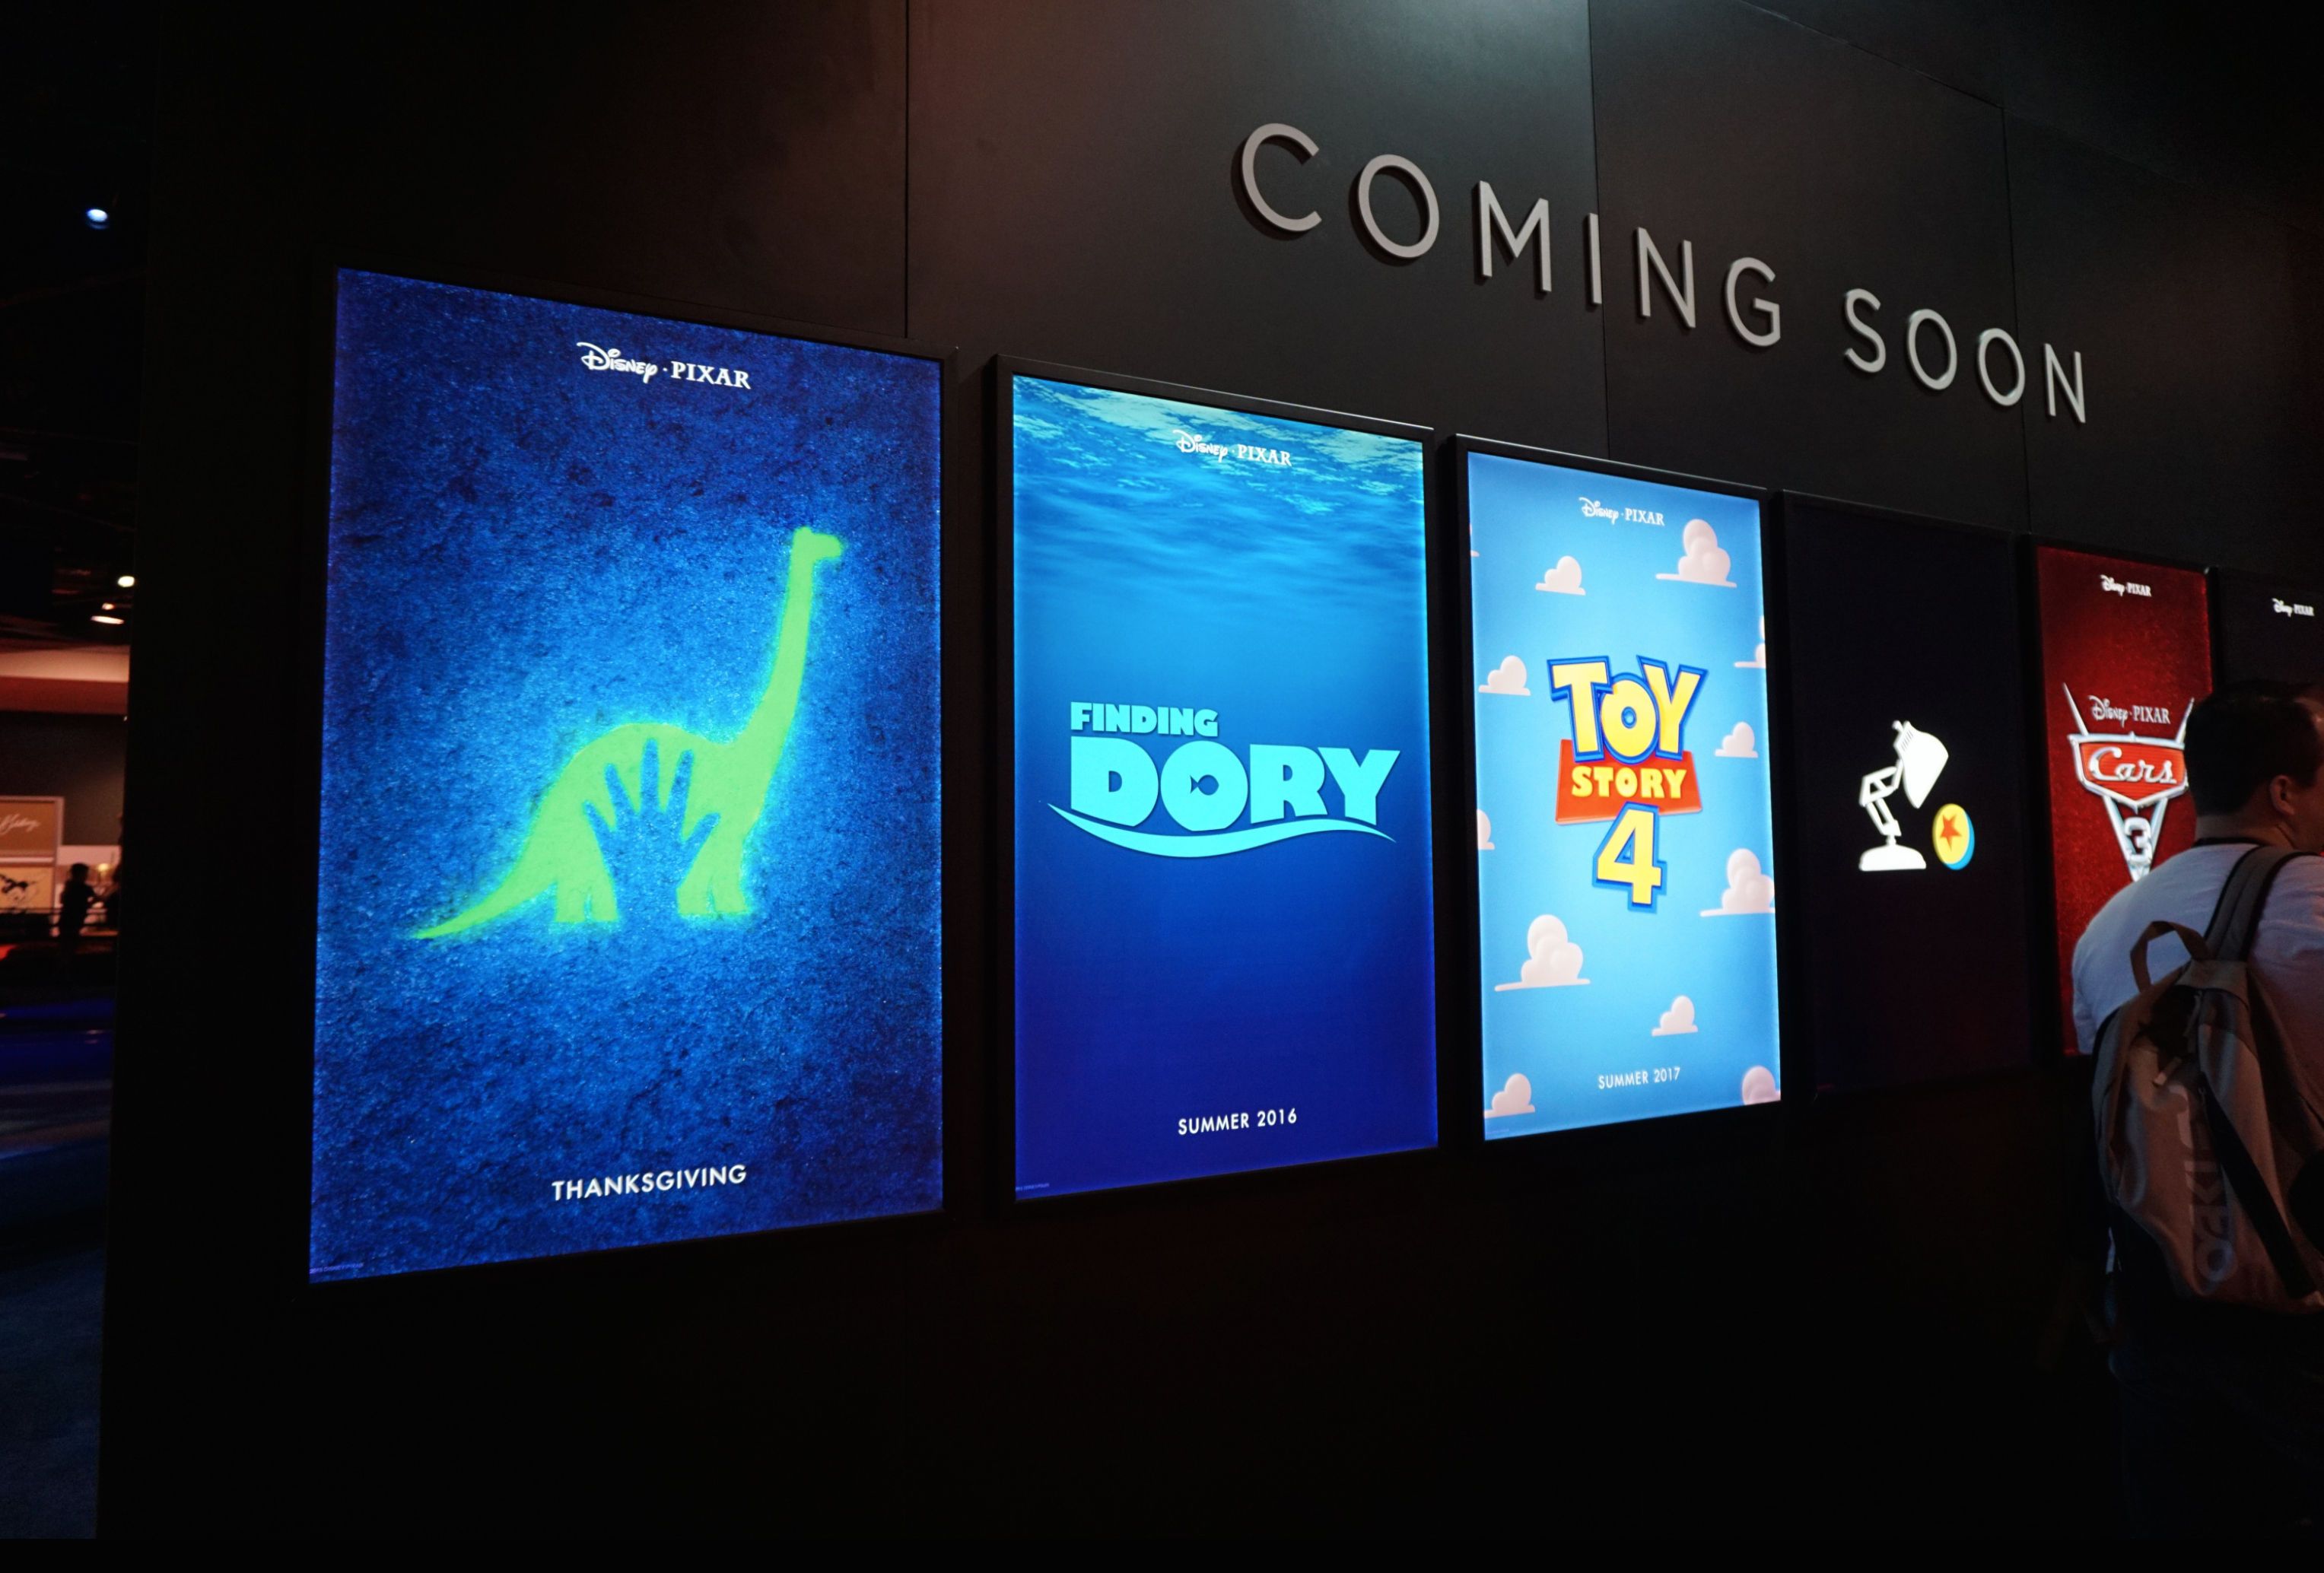 Posters for Toy Story 4, Incredibles 2 and more